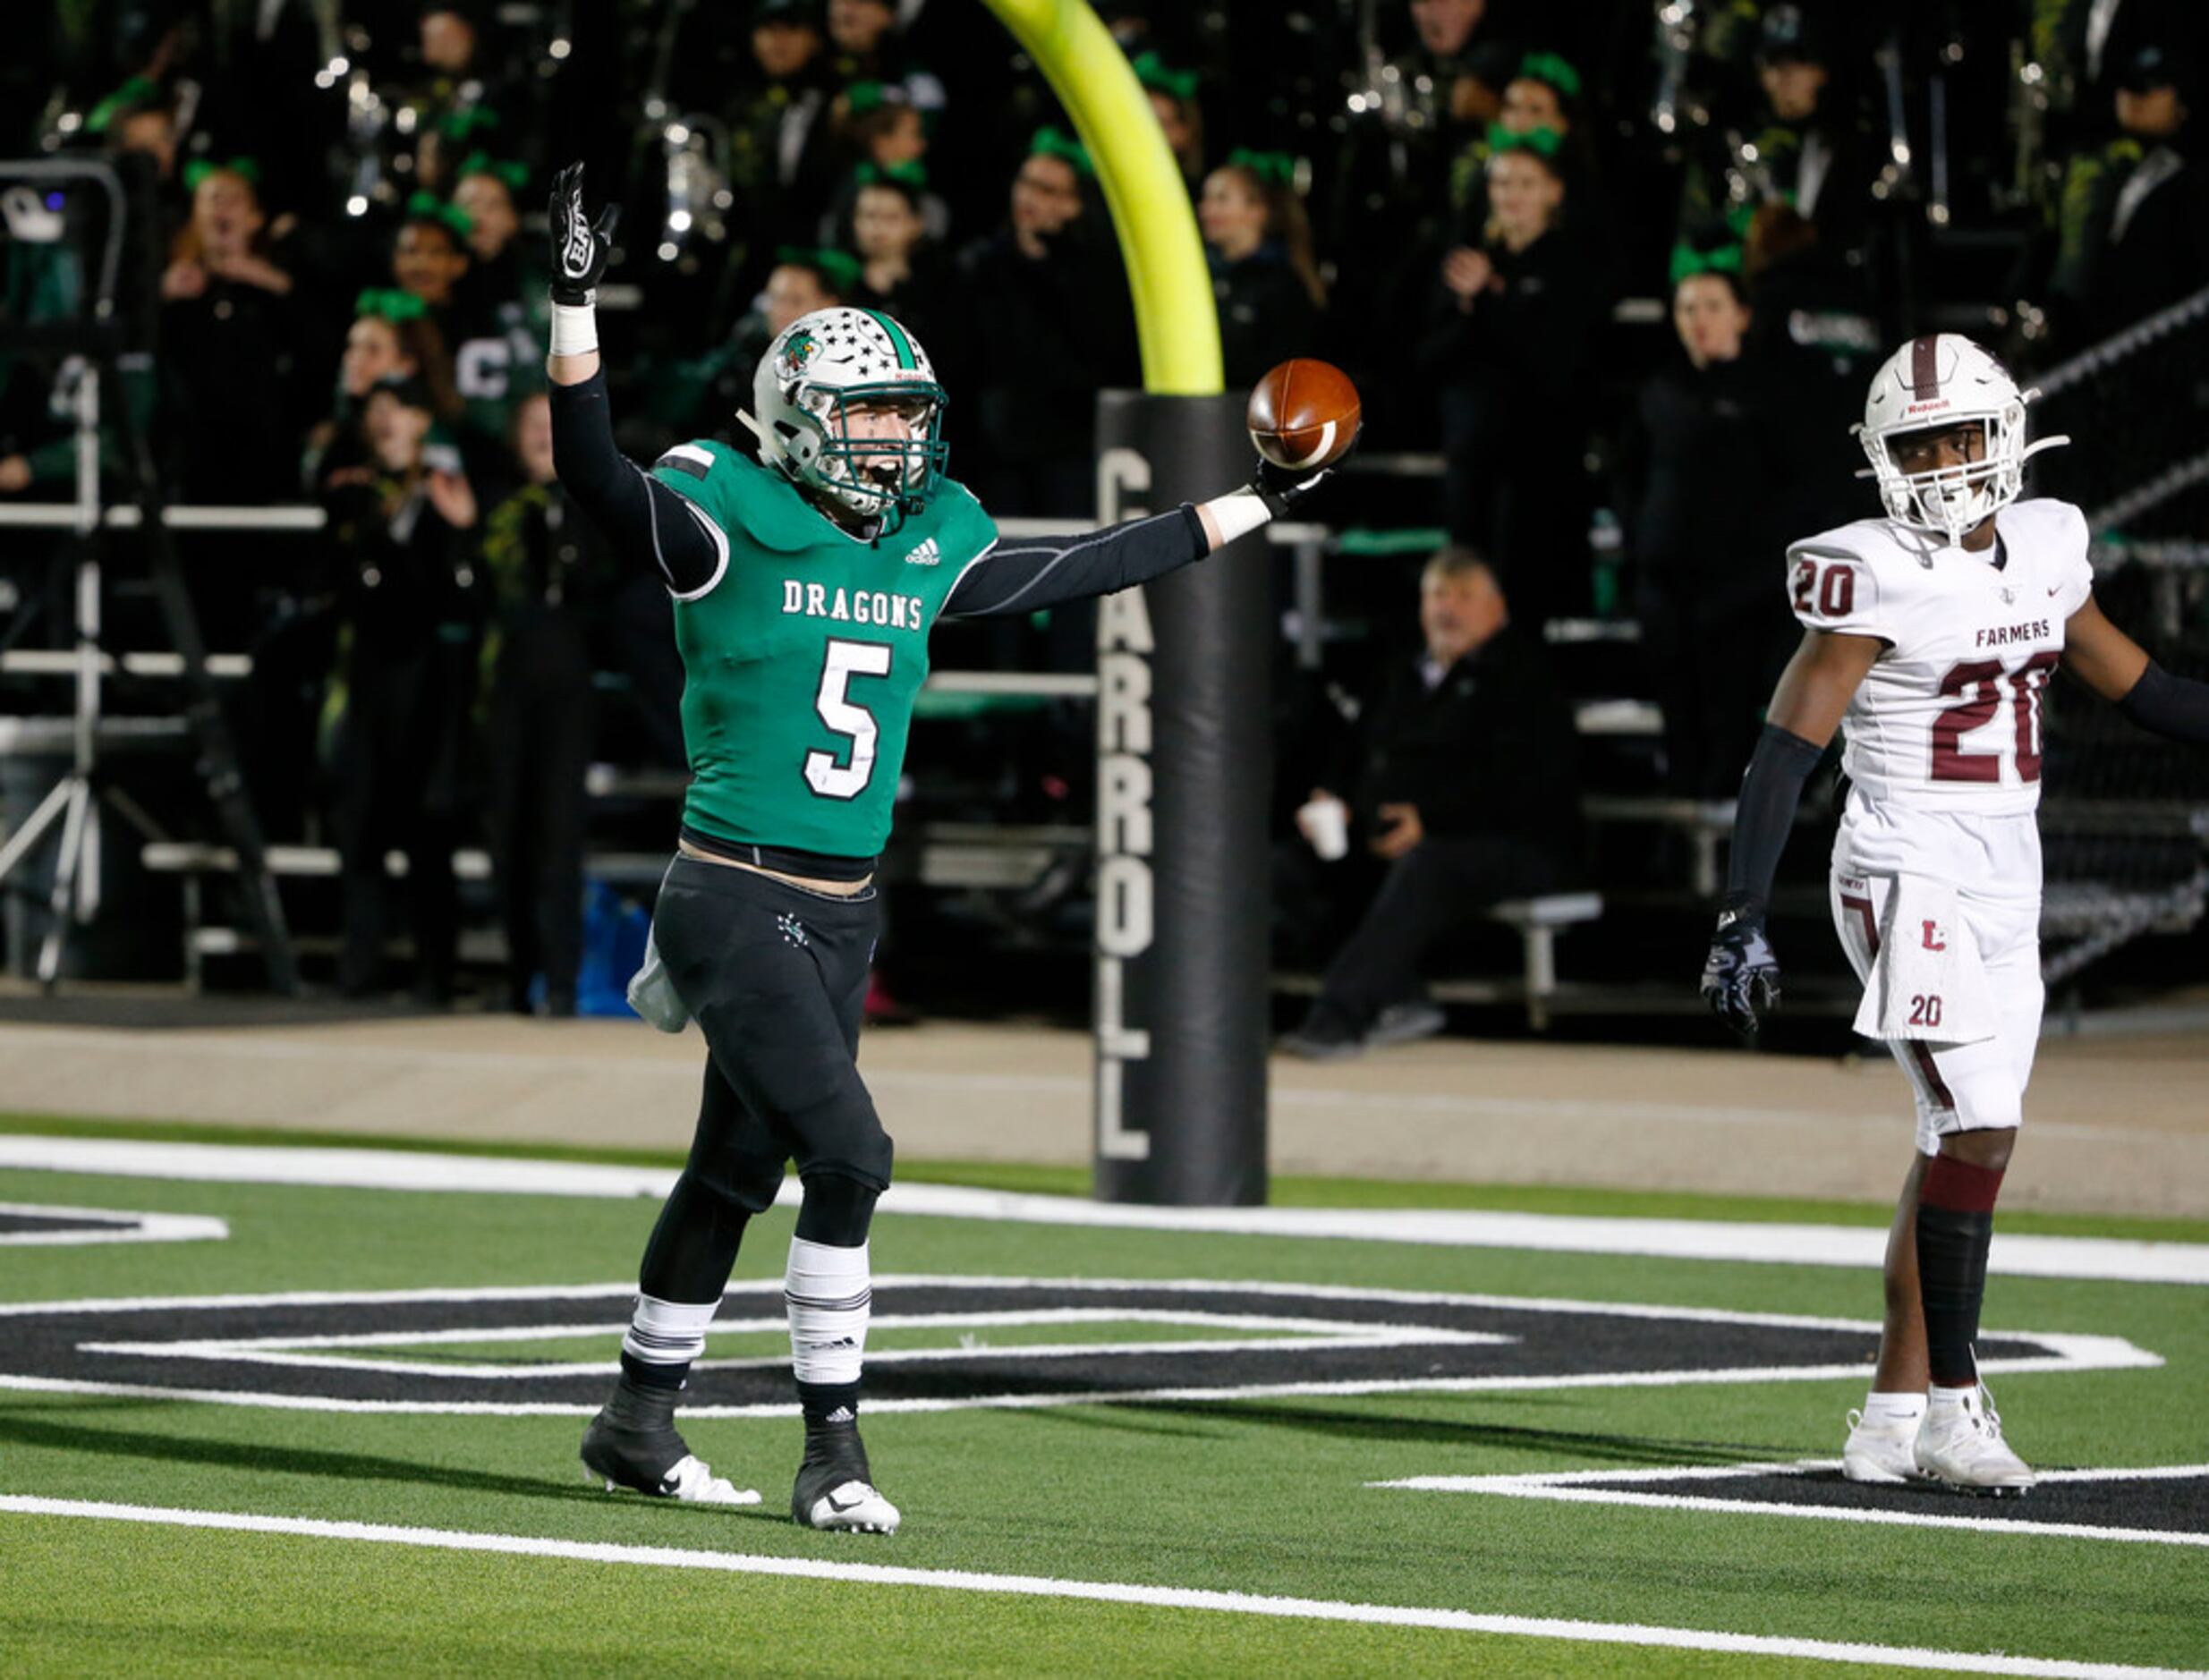 Southlake Carroll's Wills Meyer (5) celebrates his touchdown reception as Lewisville's...